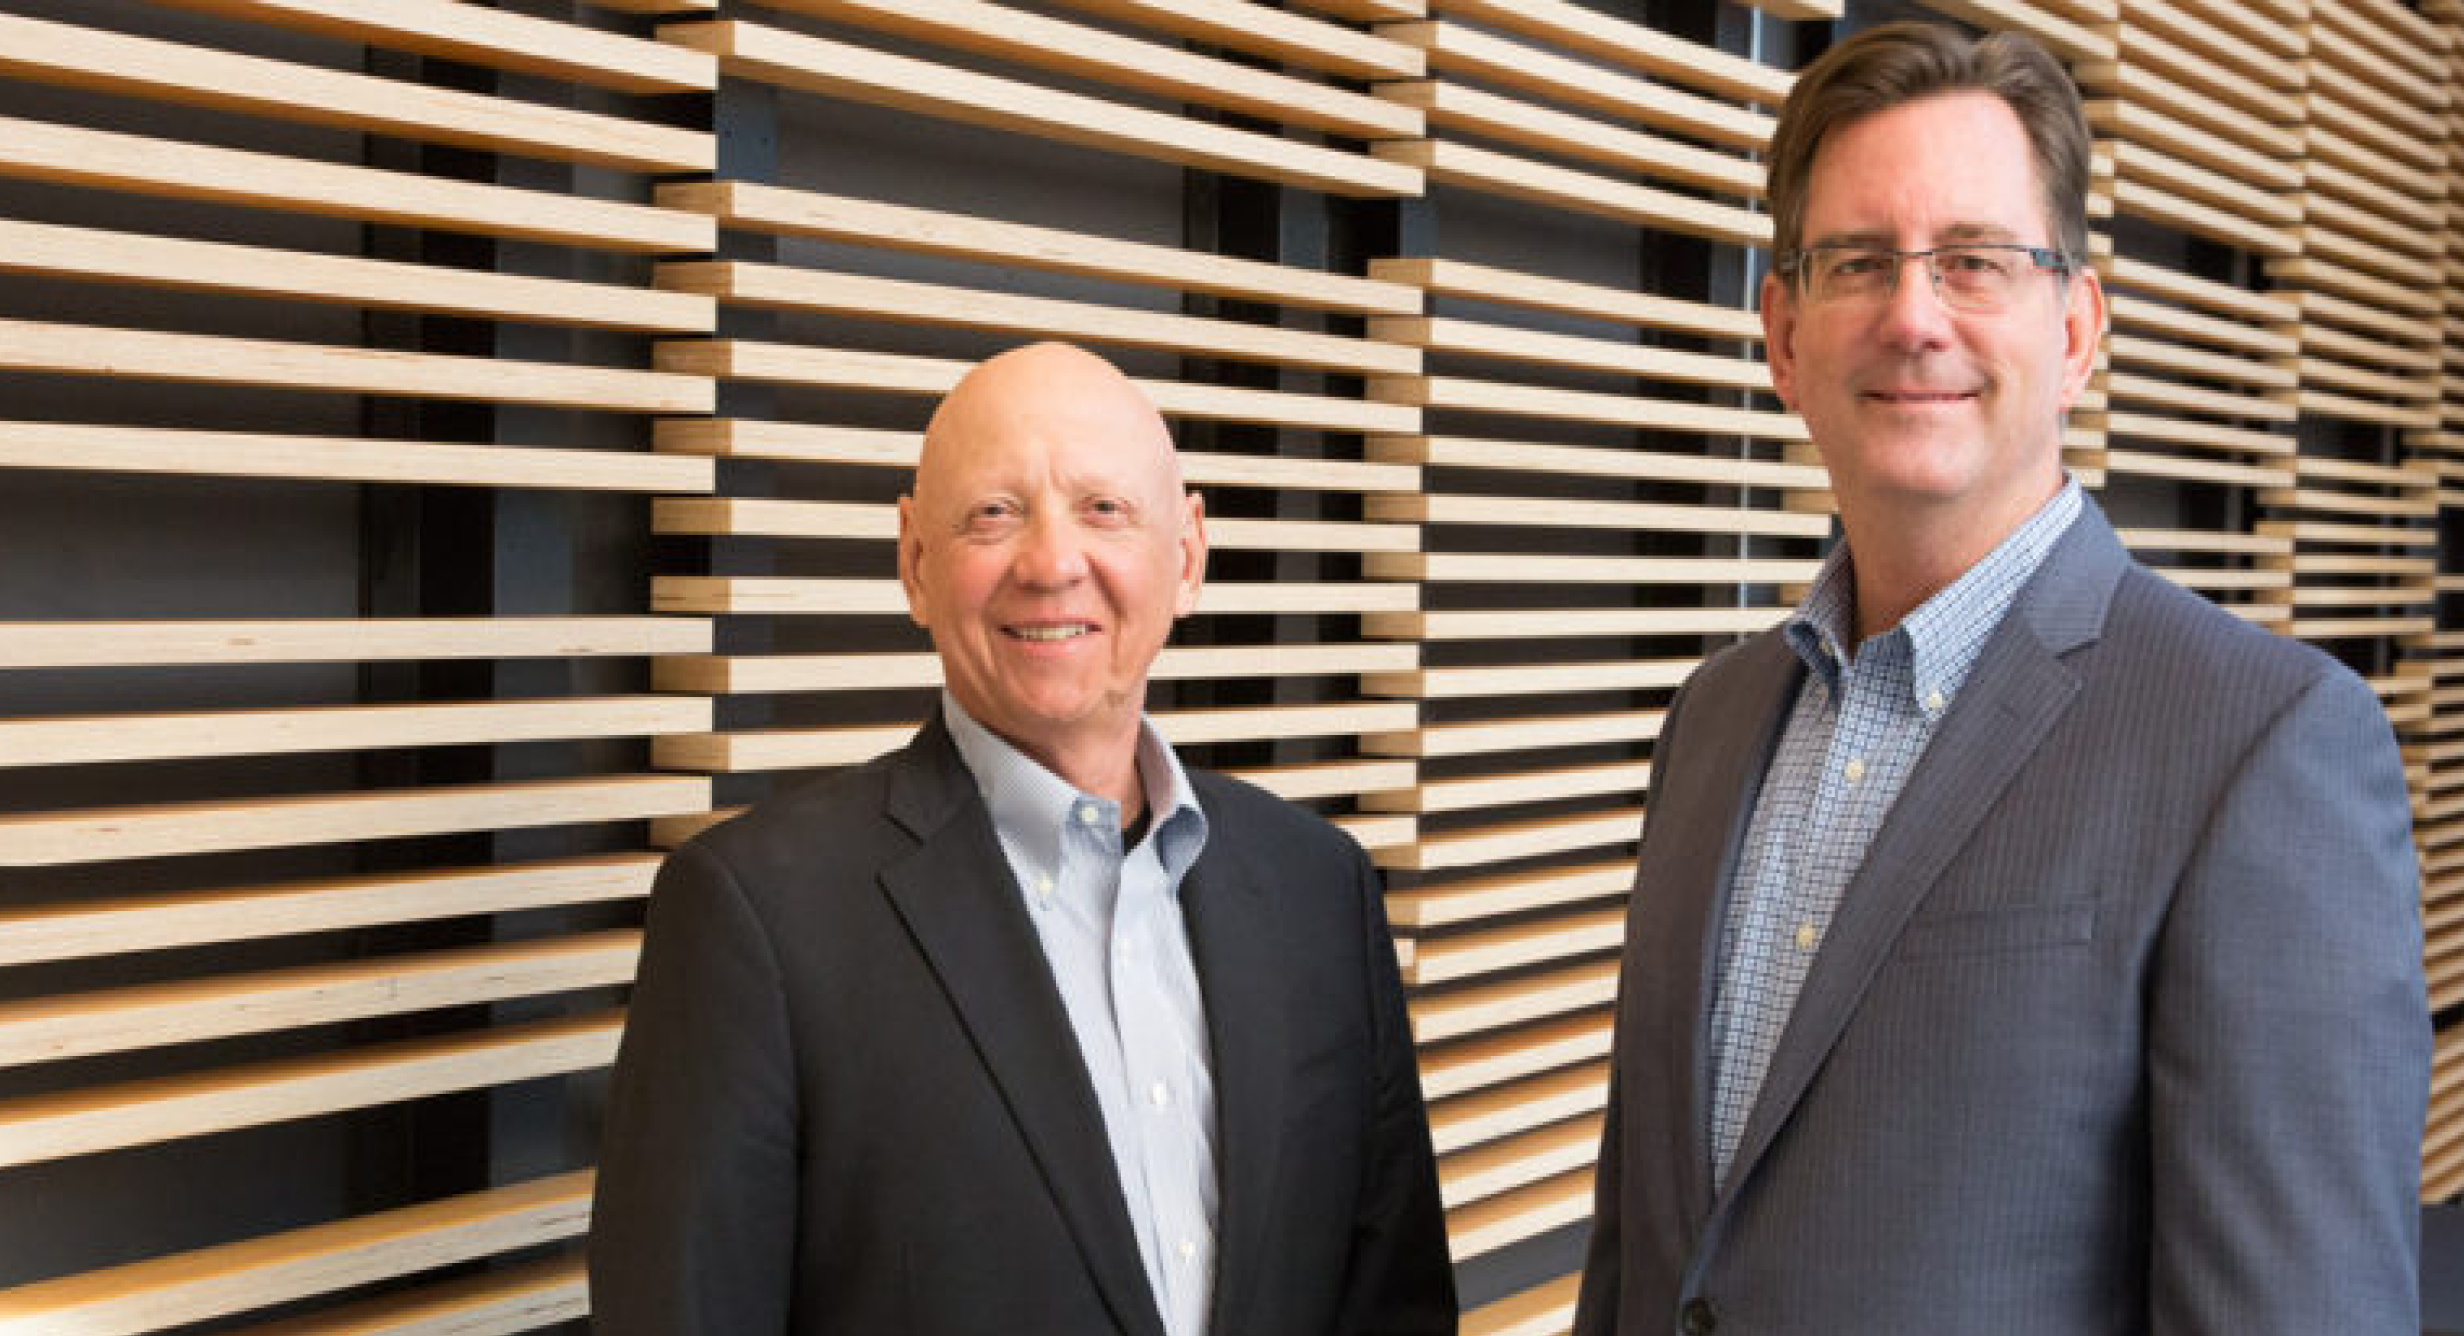 HKS’ Jeff Stouffer and Craig Williams Elected to Esteemed AIA College of Fellows